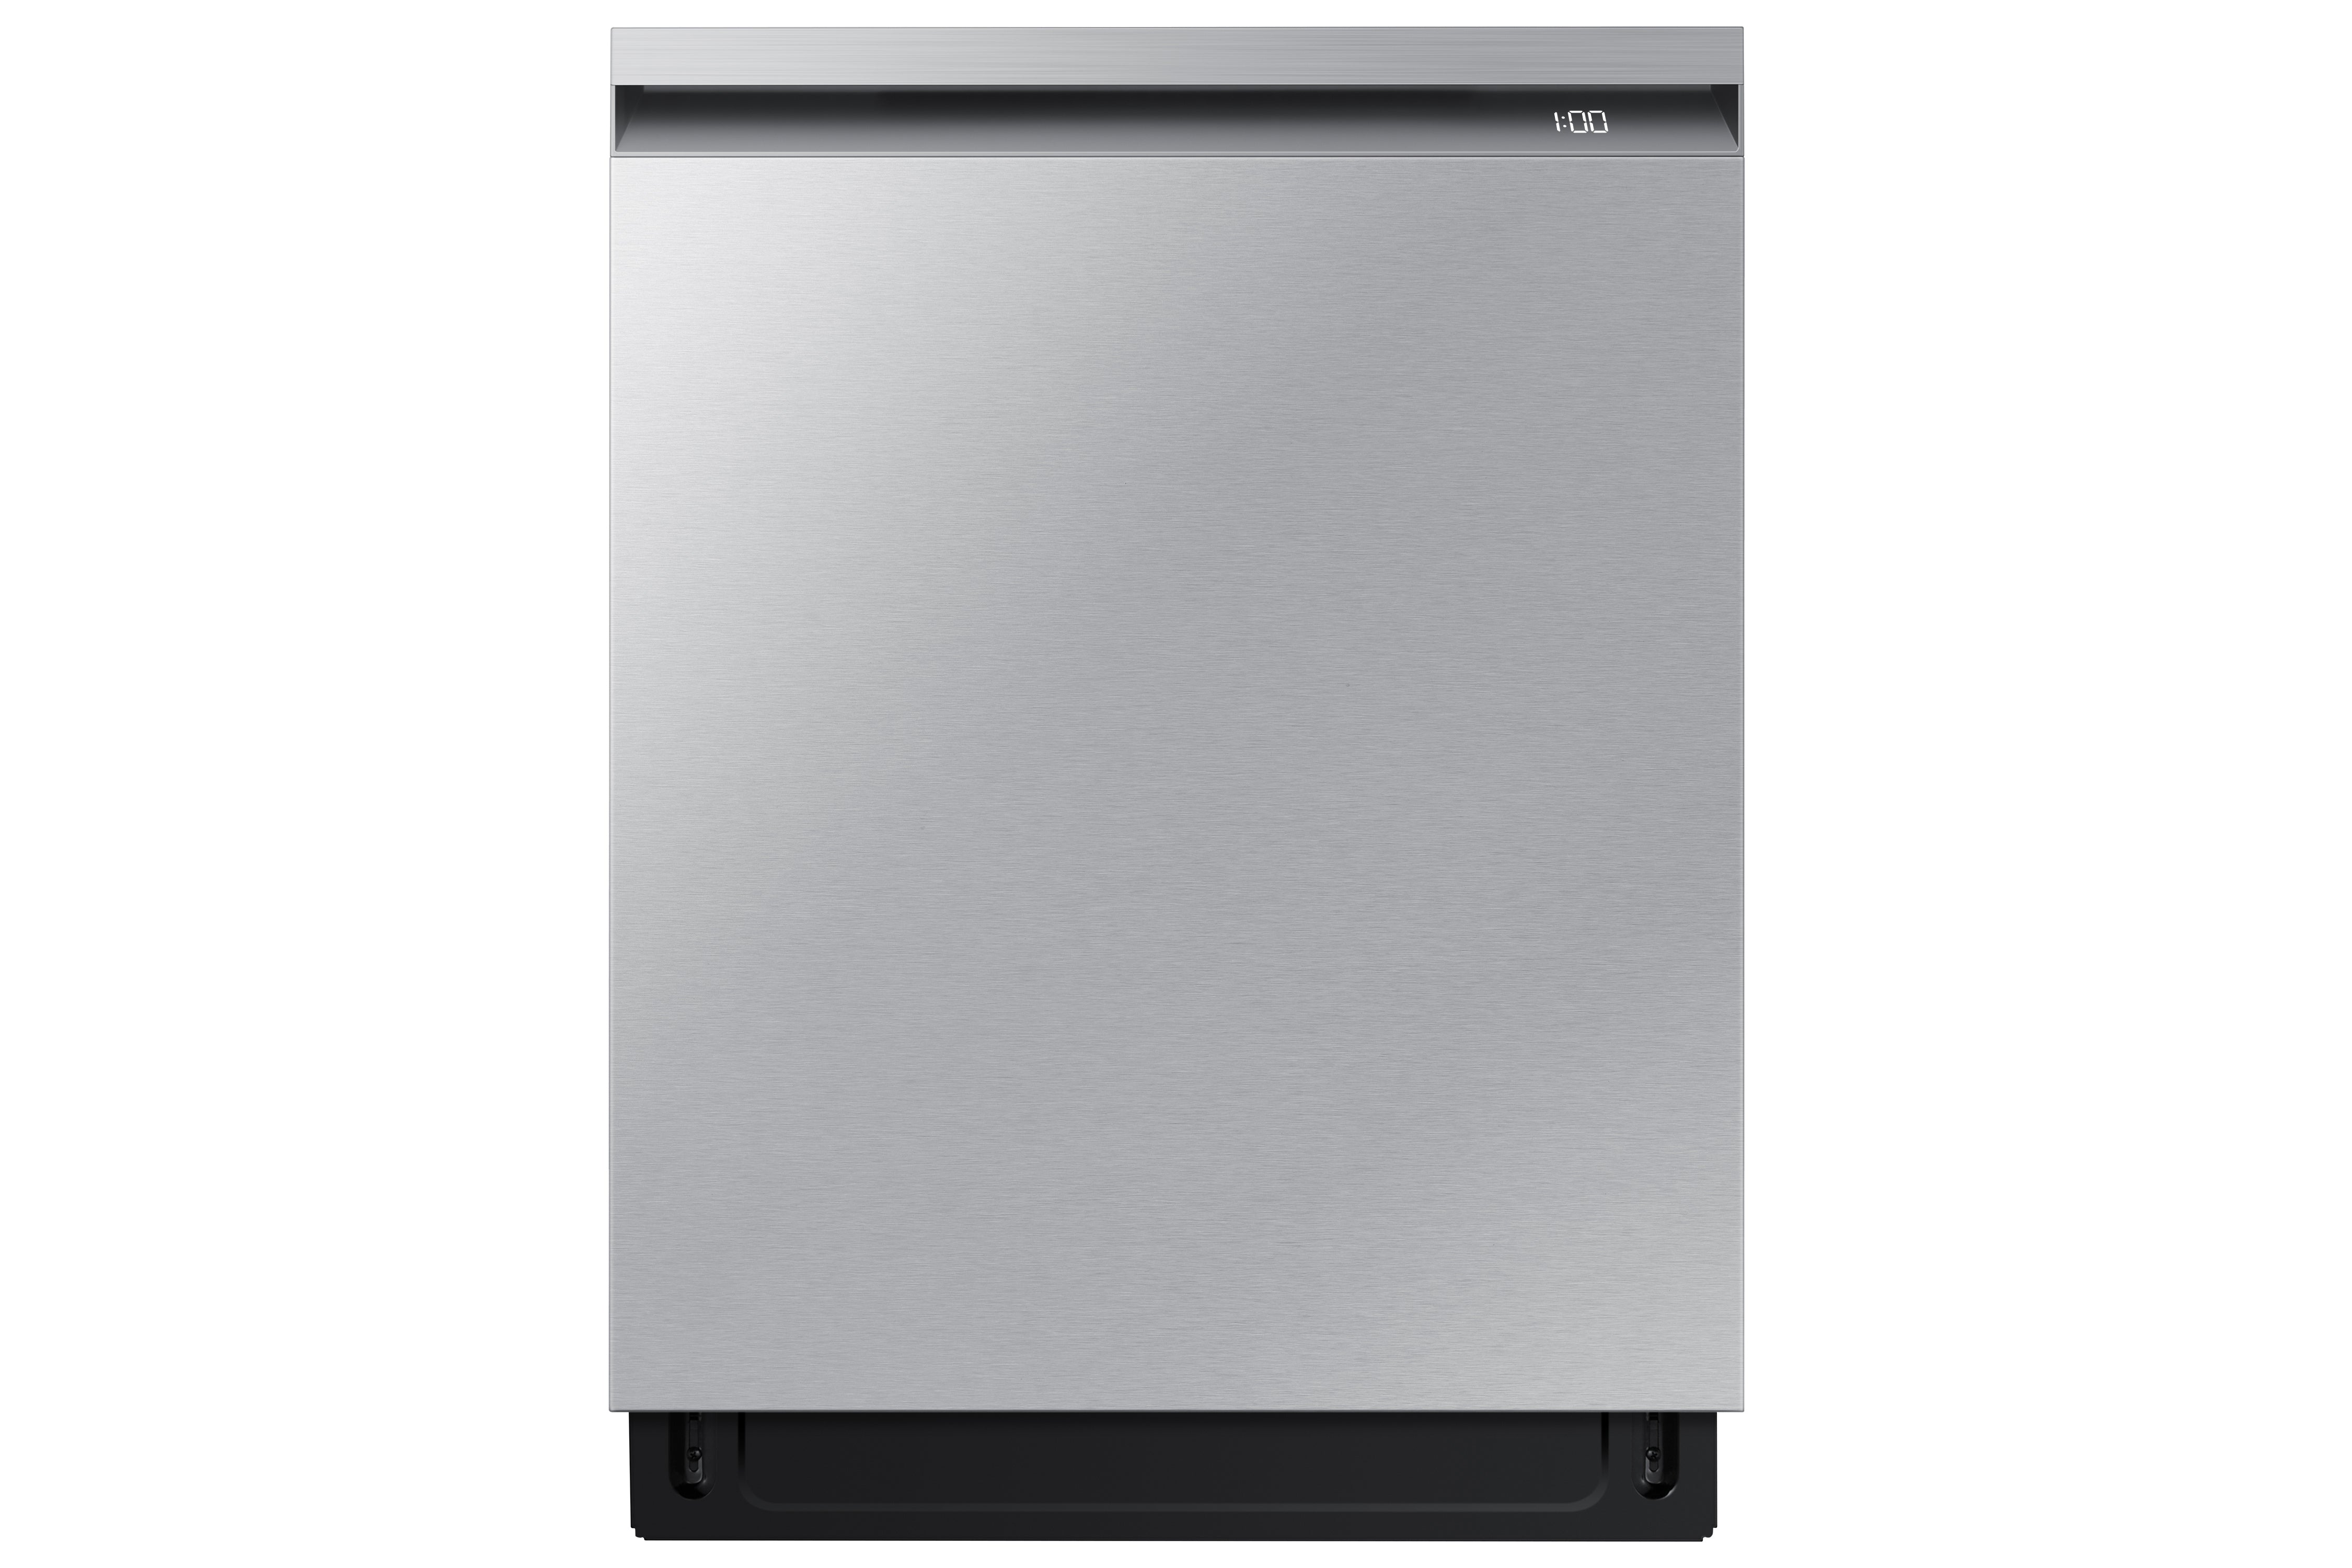 Samsung - 44 dBA Built In Dishwasher in Stainless - DW80B6060US